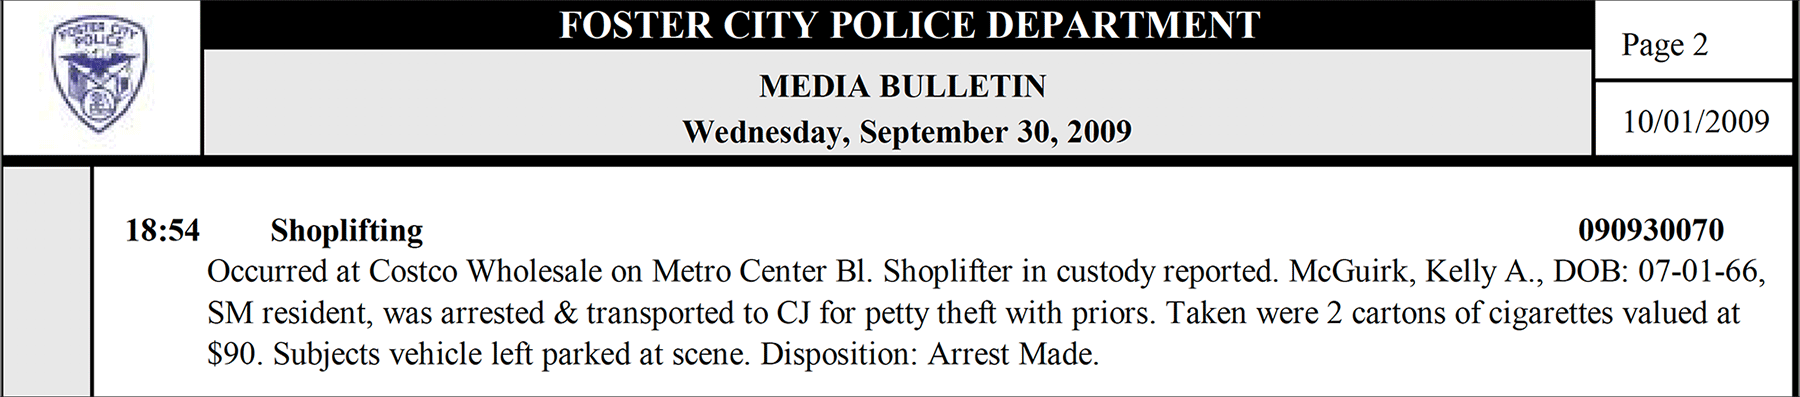 Shoplifting -- Occurred at Costco. Shoplifter in custody reported.  McGuirk, Kelly A, SM resident was arrested and transported to county jail for petty theft with priors.  Taken were 2 cartons of cigarettes valued at $90. Disposition: Arrest made.